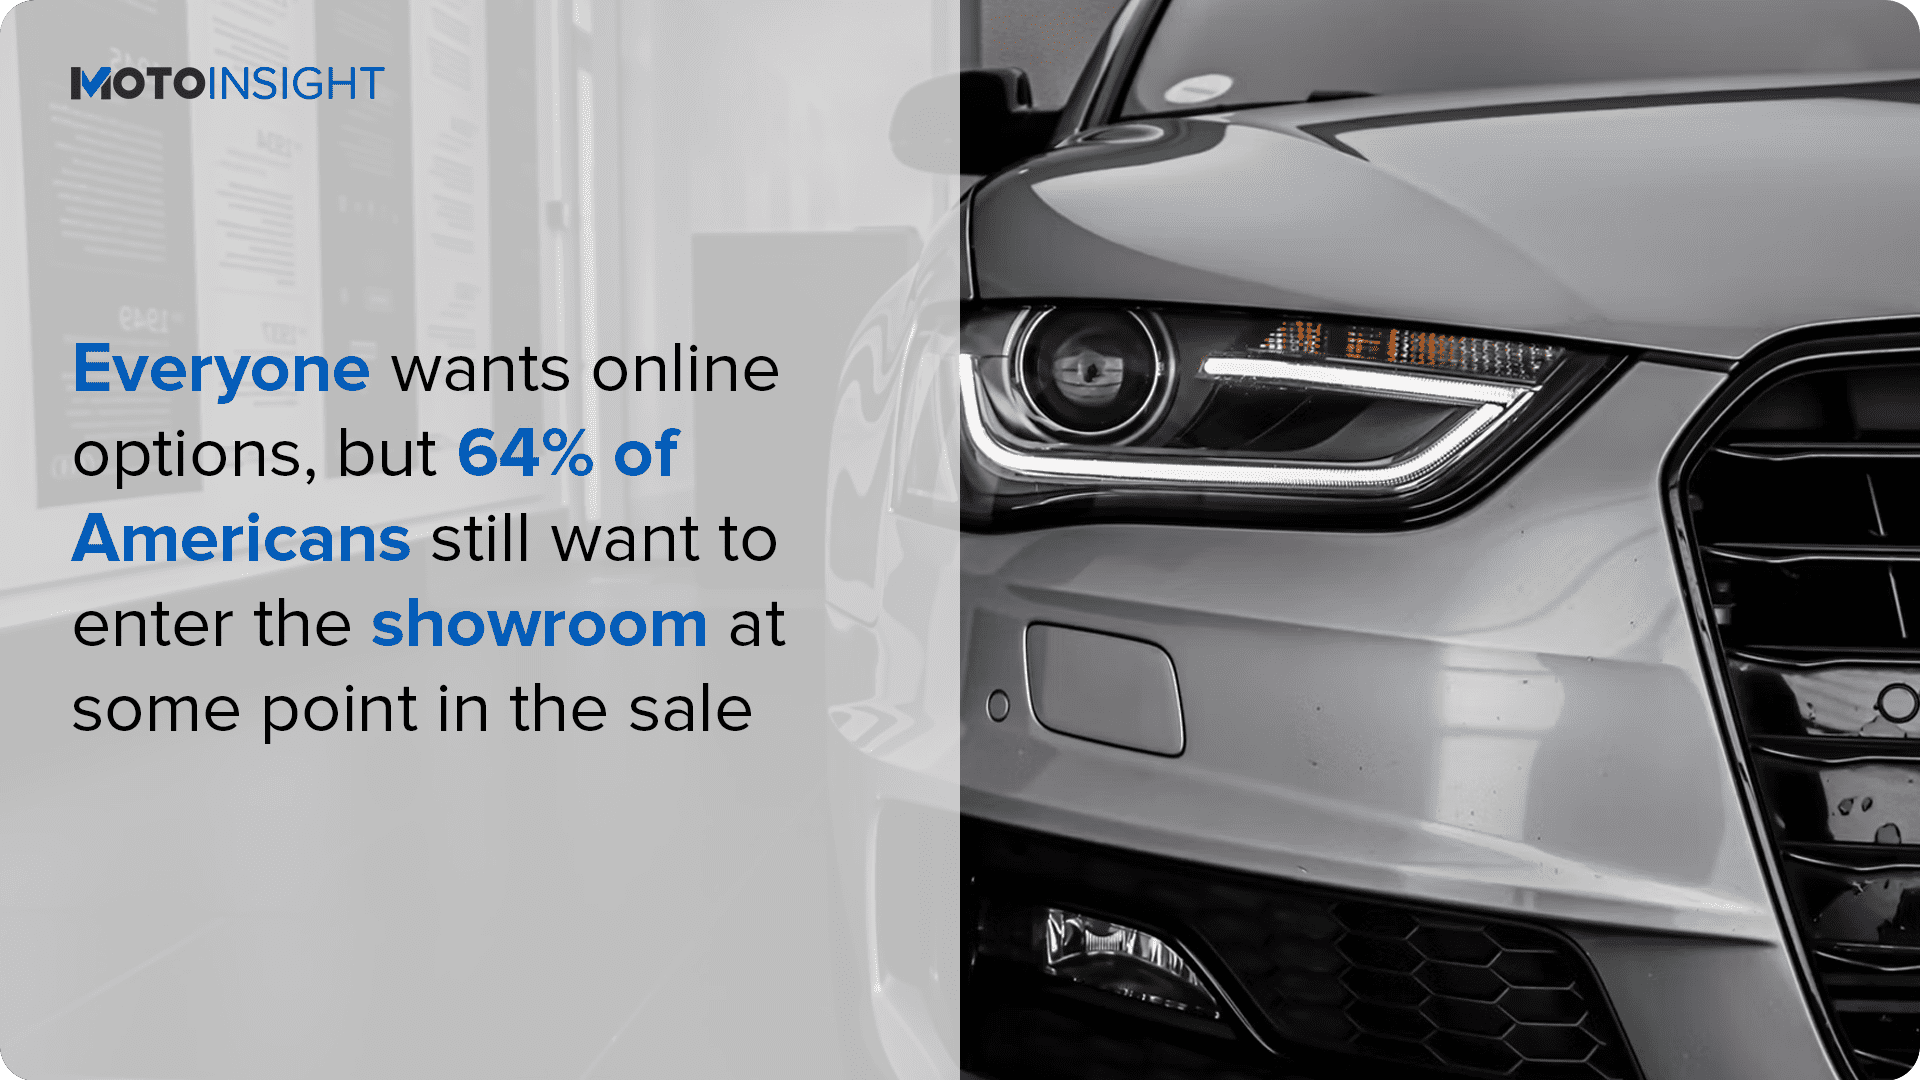 Everyone wants online options, but 64% of Americans still want to enter the showroom at some point in the sale